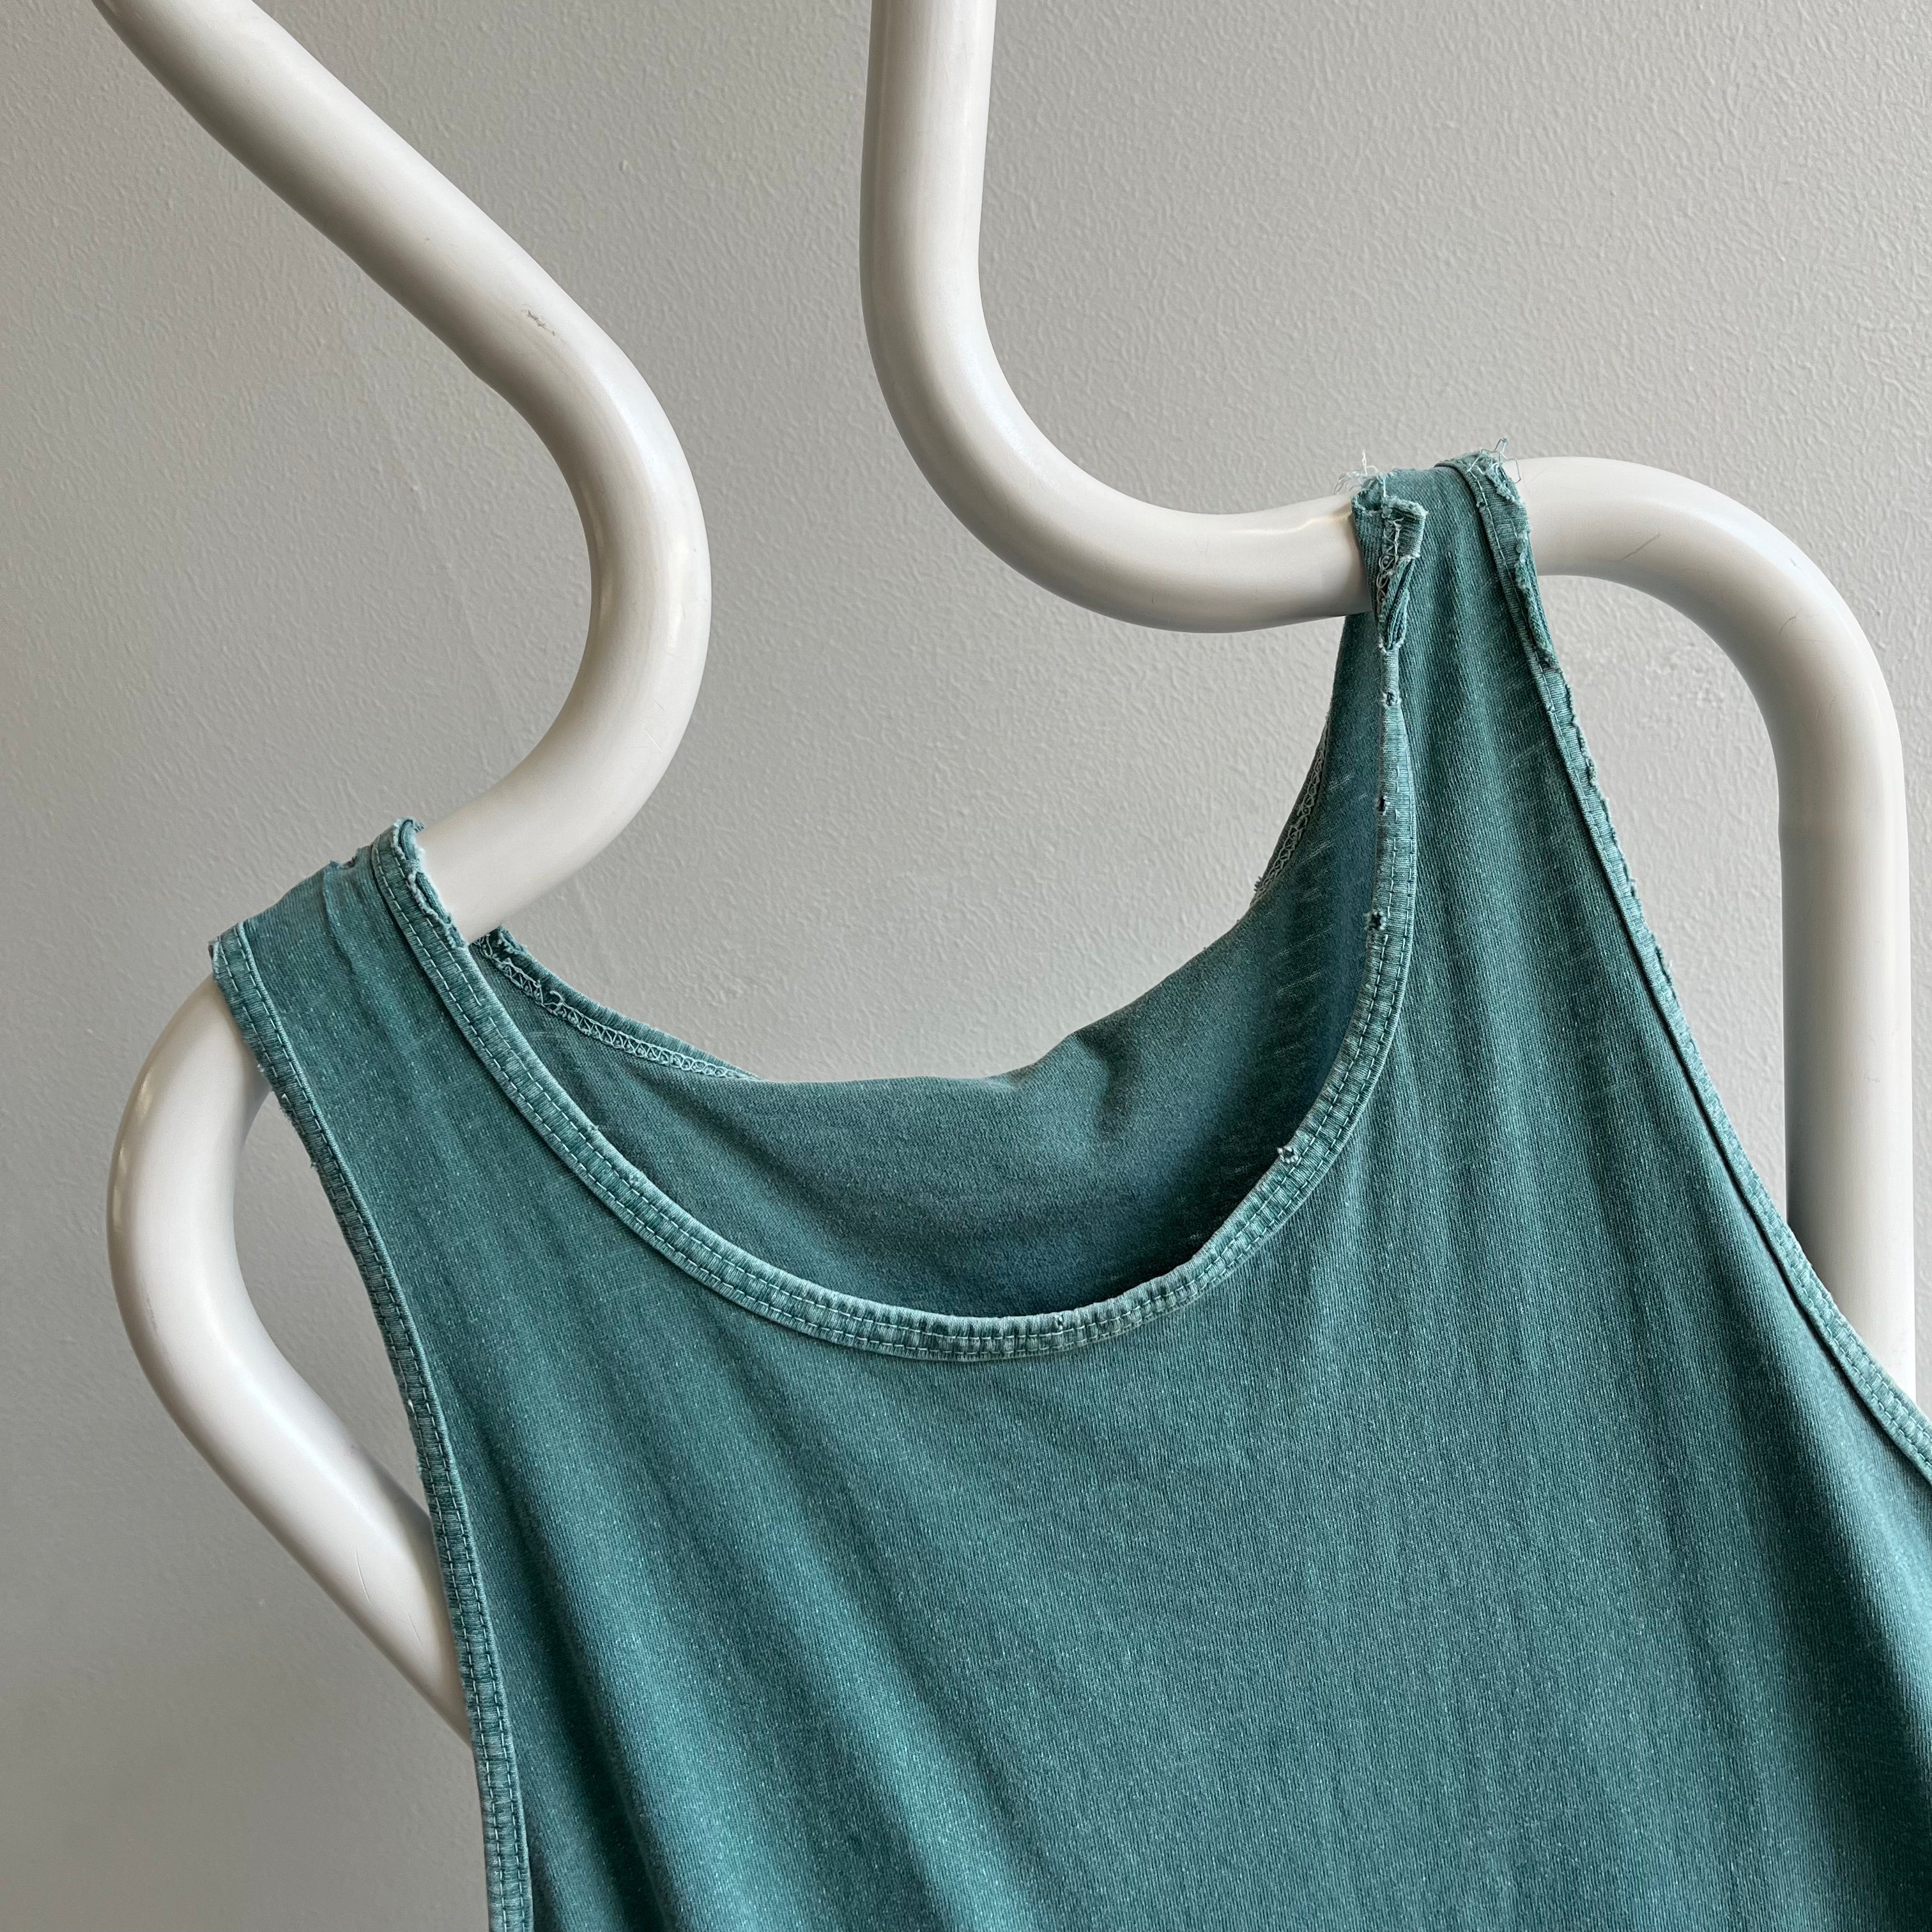 1980s Thrashed and Faded Blank Green Cotton Tank Top